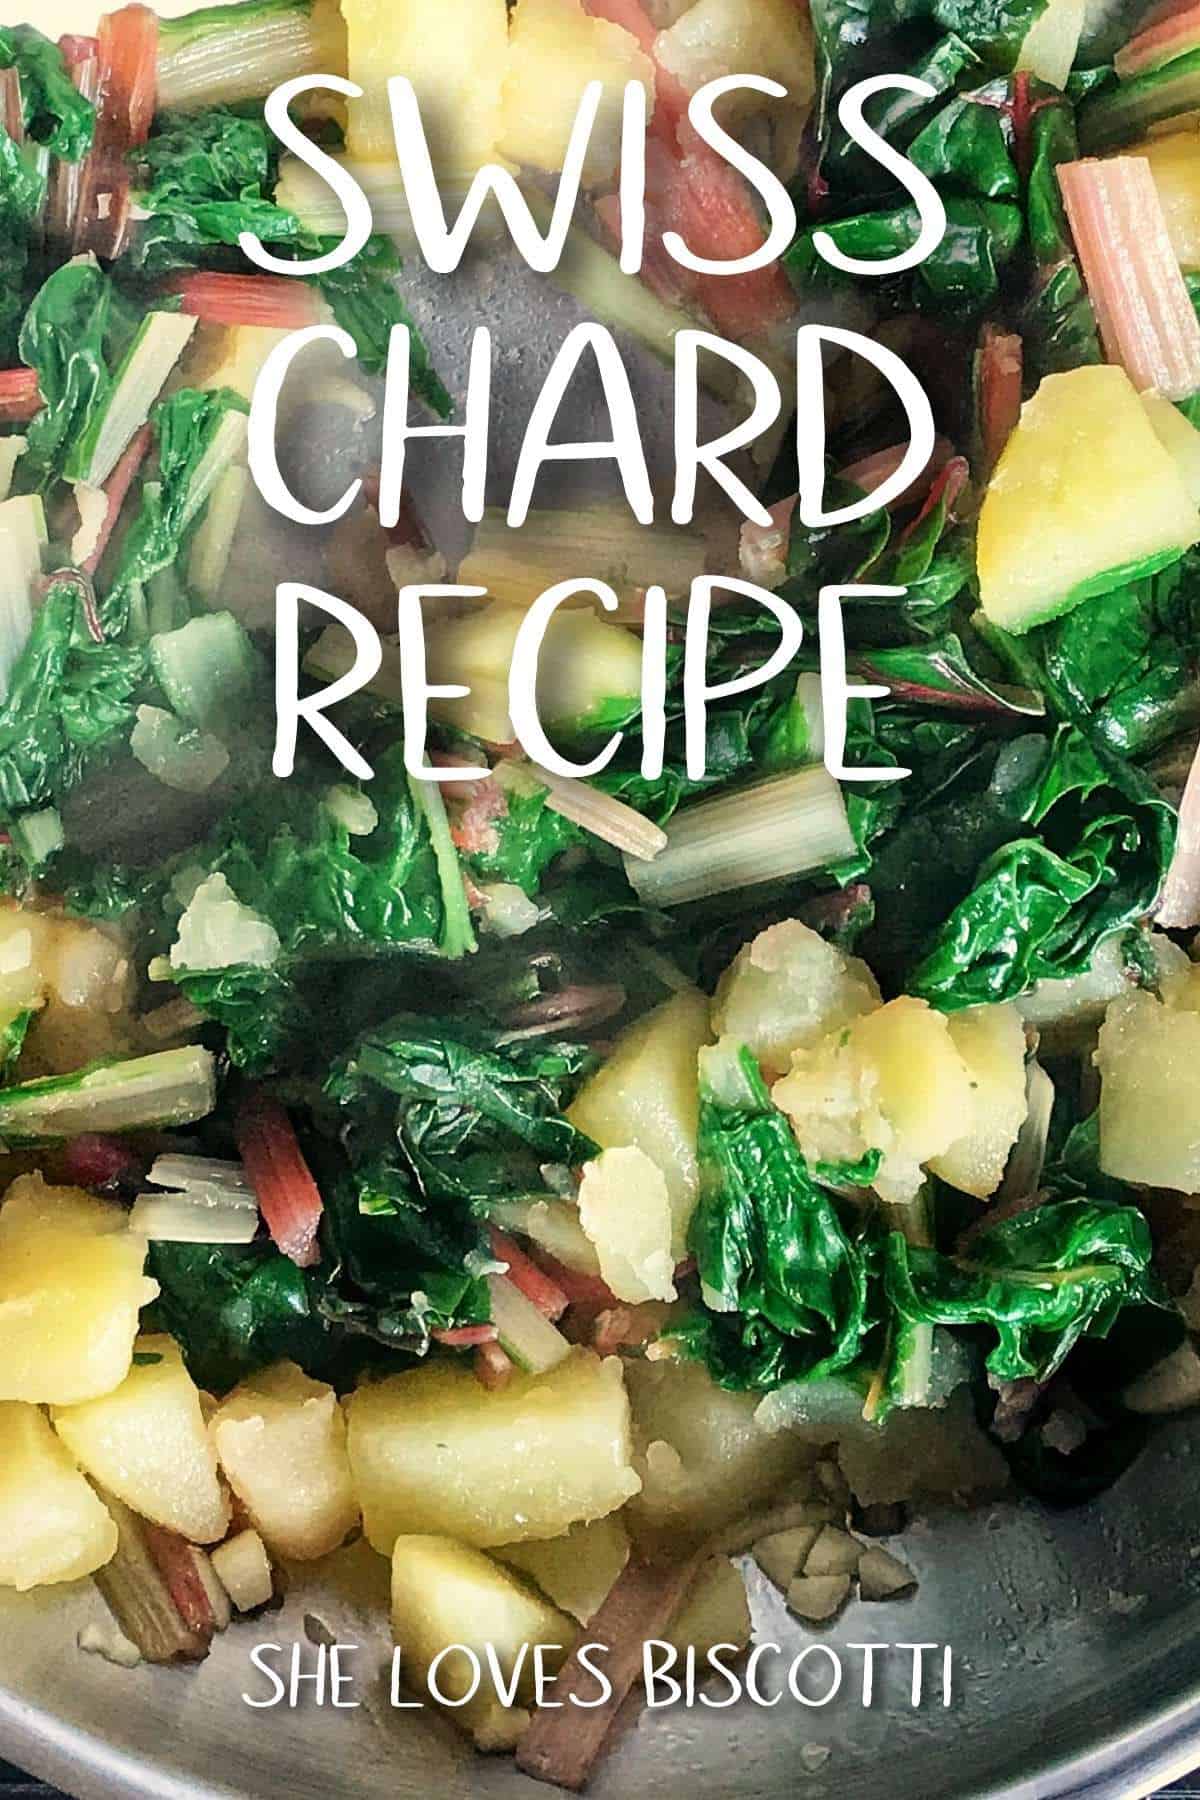 Swiss Chard Recipe with Potatoes - She Loves Biscotti